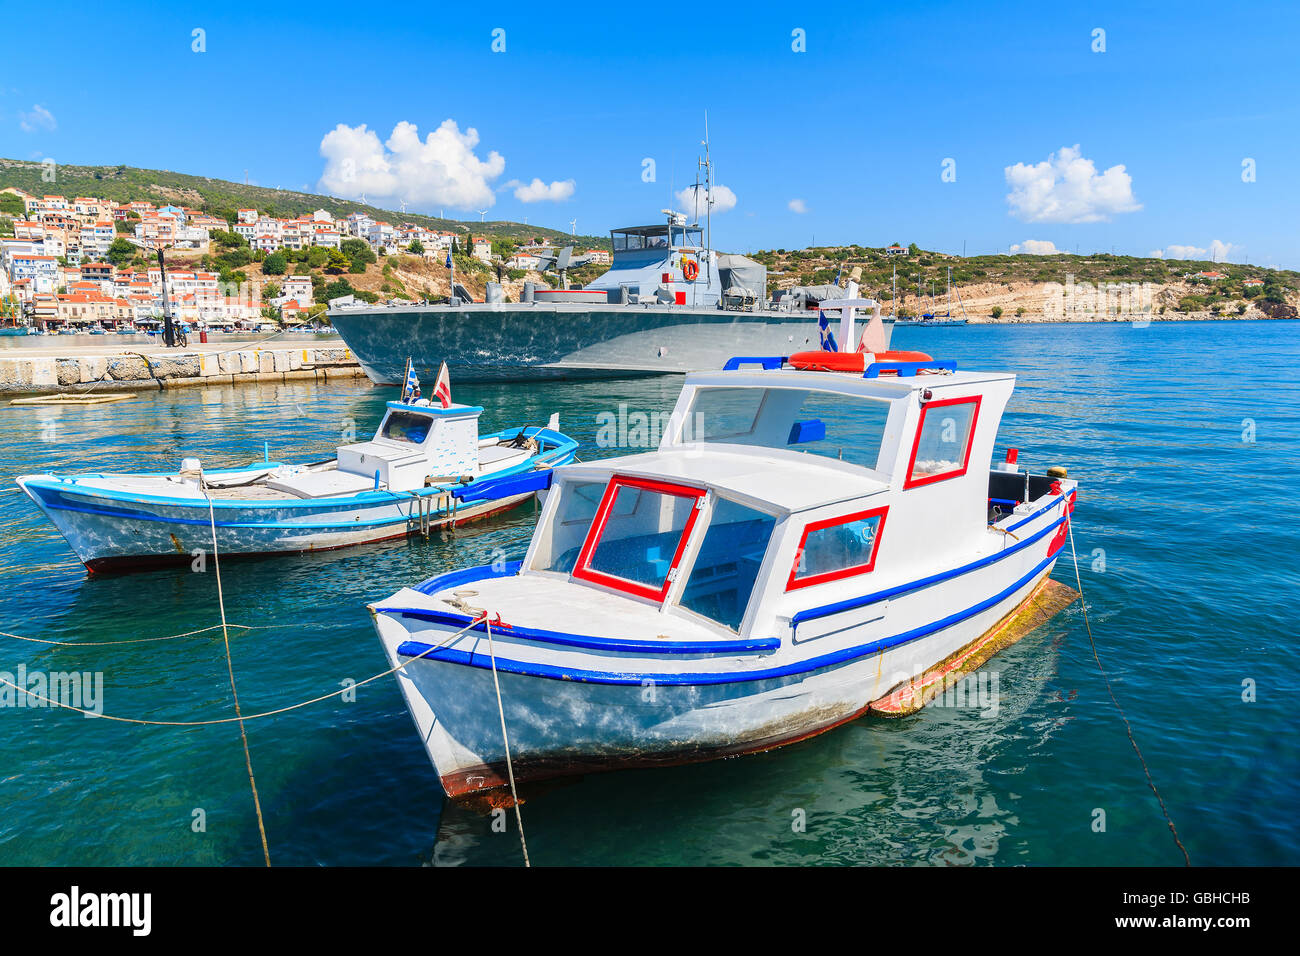 Typical colourful fishing boats with warship in background in Pythagorion port, Samos island, Greece Stock Photo